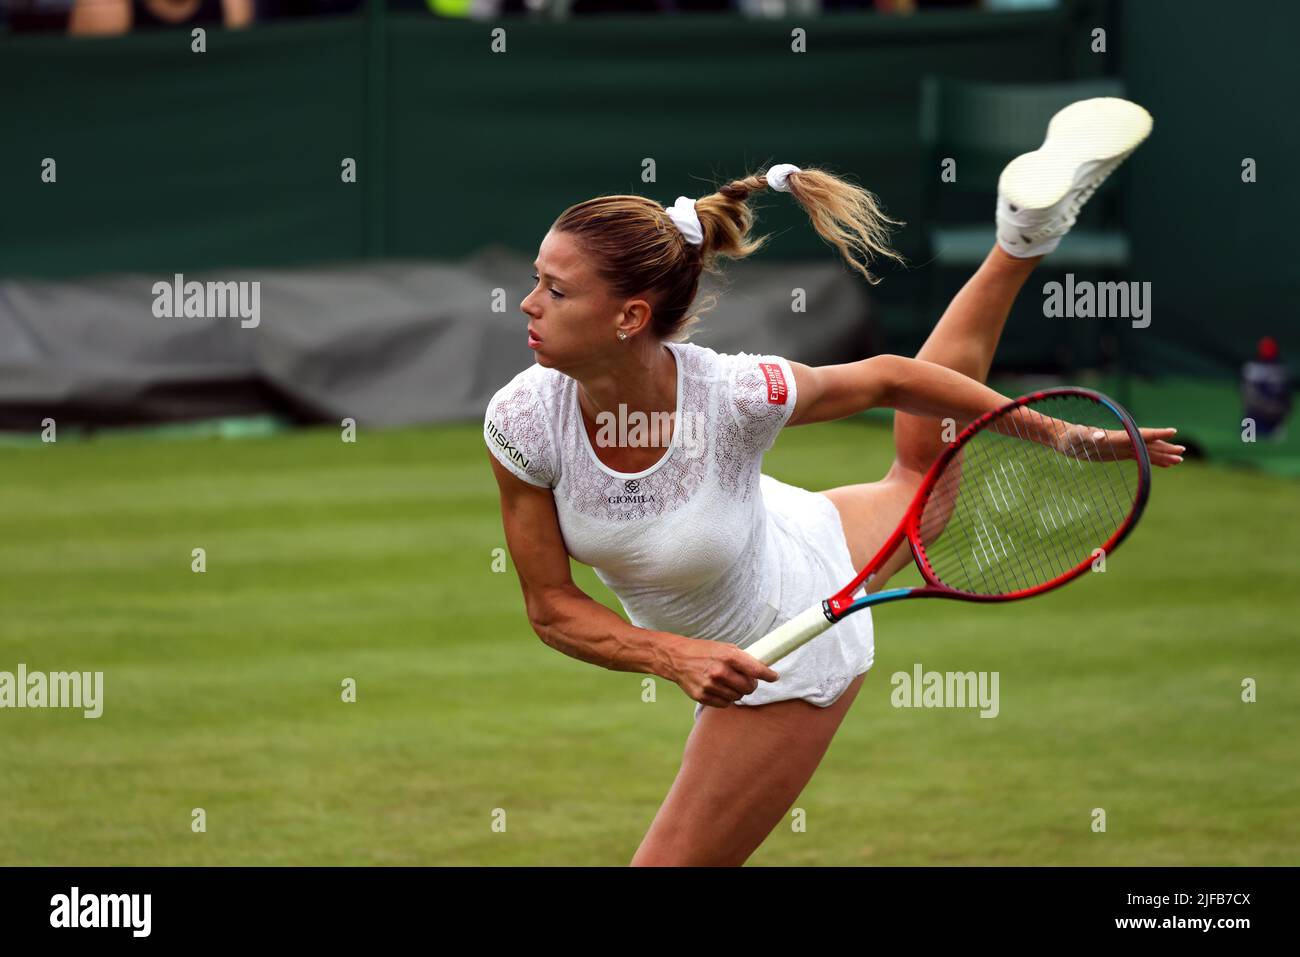 Italy's Camila Giorgi serving to Magdalena Fech of Poland during their  first round match on Tuesday, June 28 at Wimbledon. Giorgi lost the match  in straight sets. Credit: Adam Stoltman/Alamy Live News